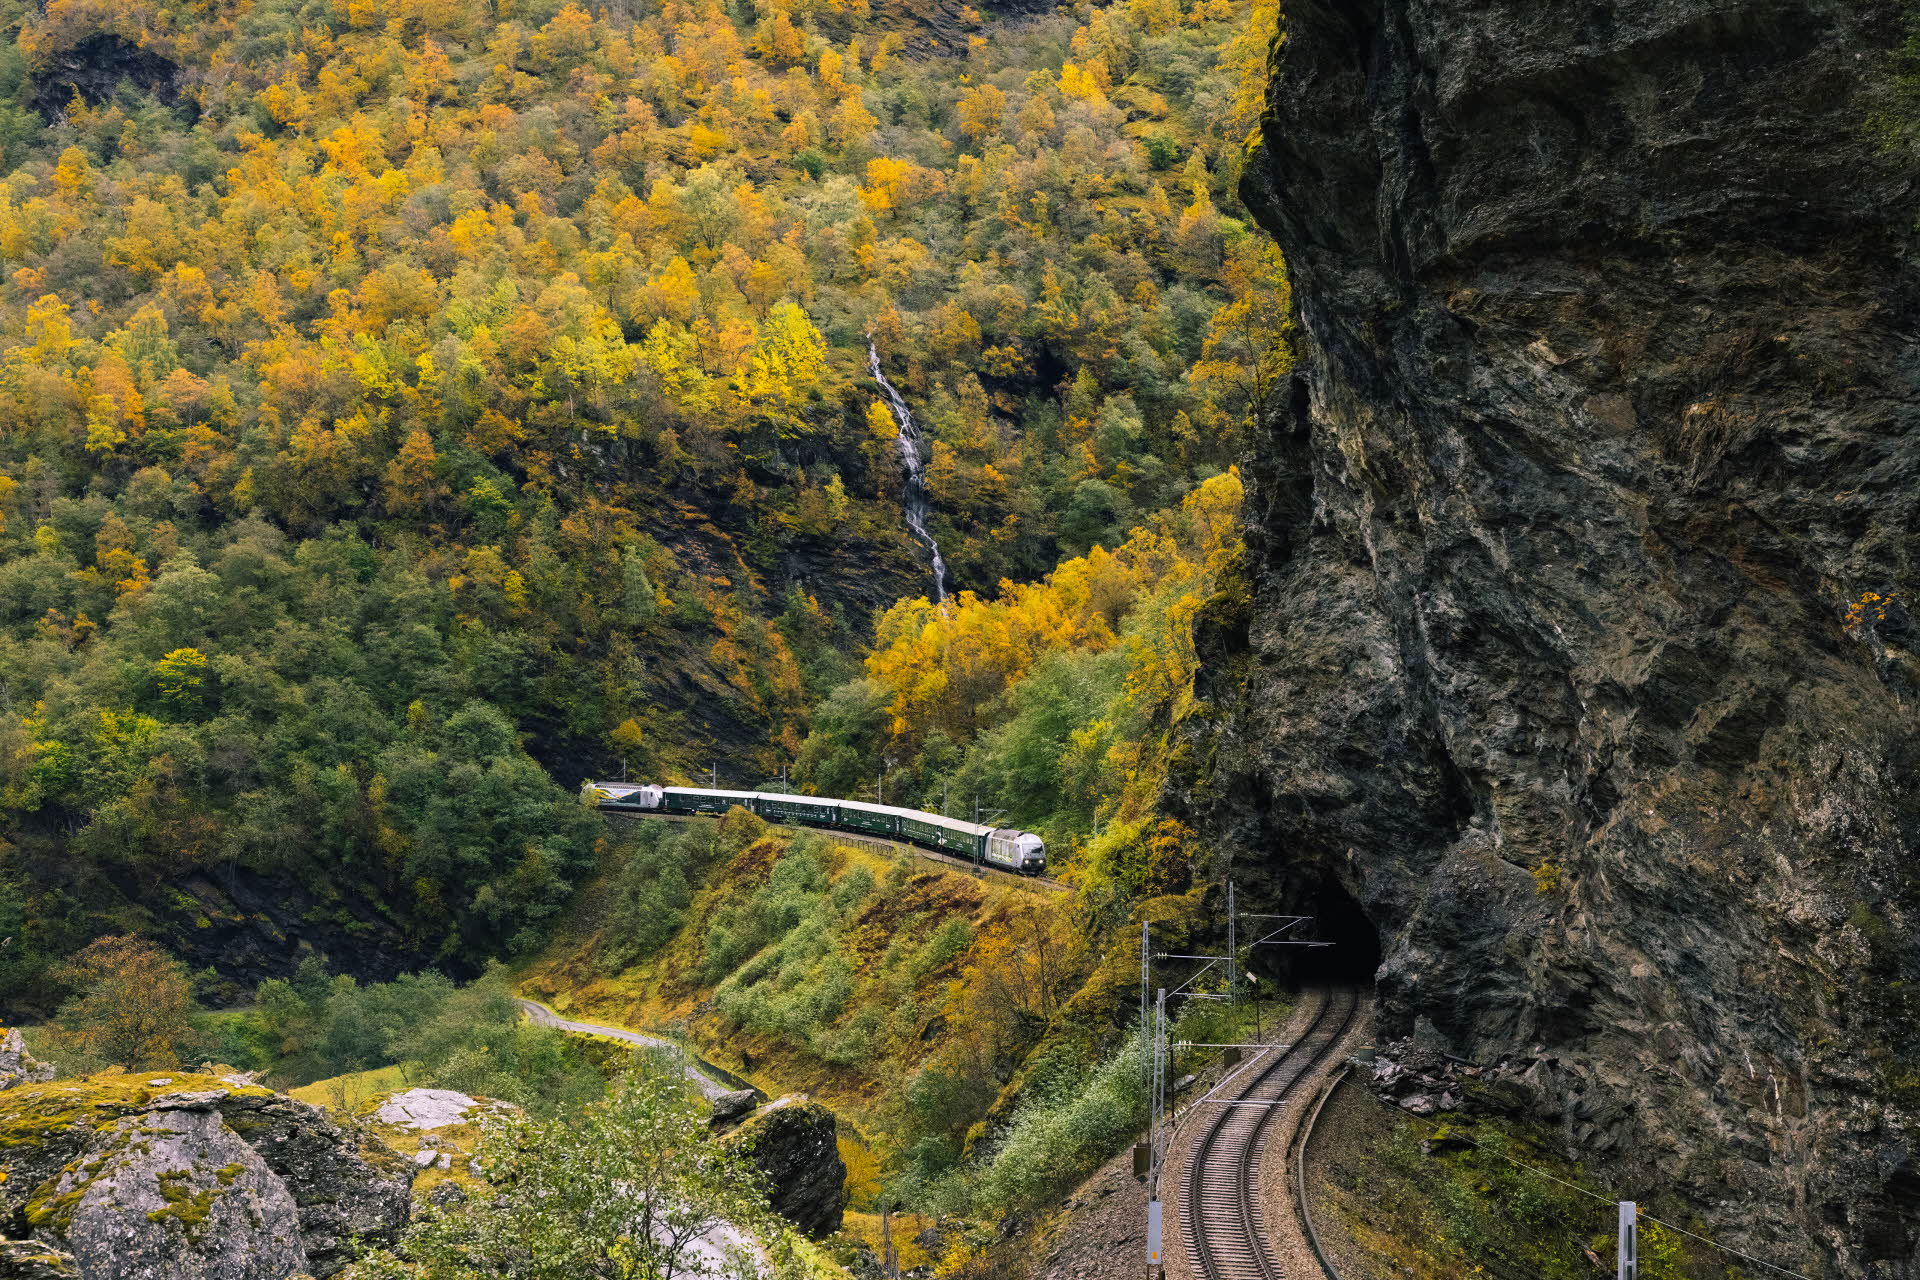 The Flåm Railway between two tunnels in the Flåm Valley surrounded by autumn colored forest. 